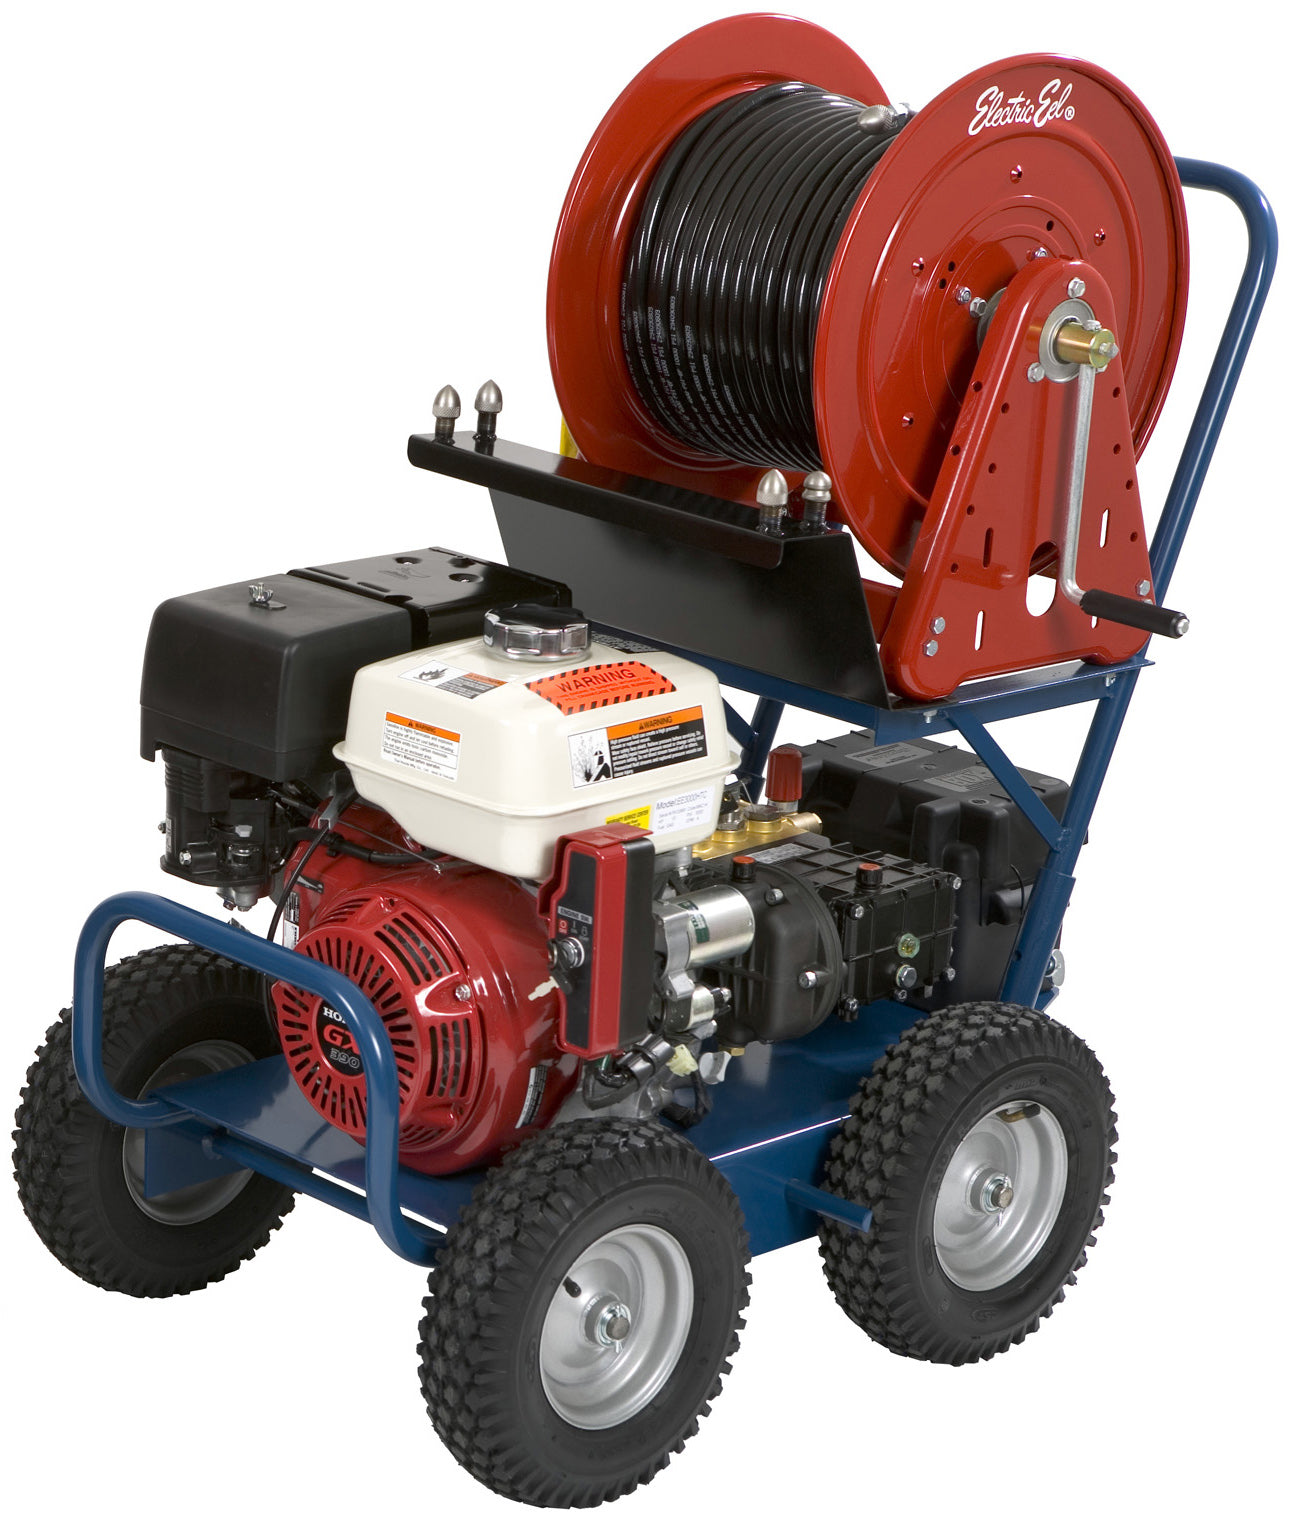 Electric Eecl EJ-3000C Gas Engine Drain Jetter